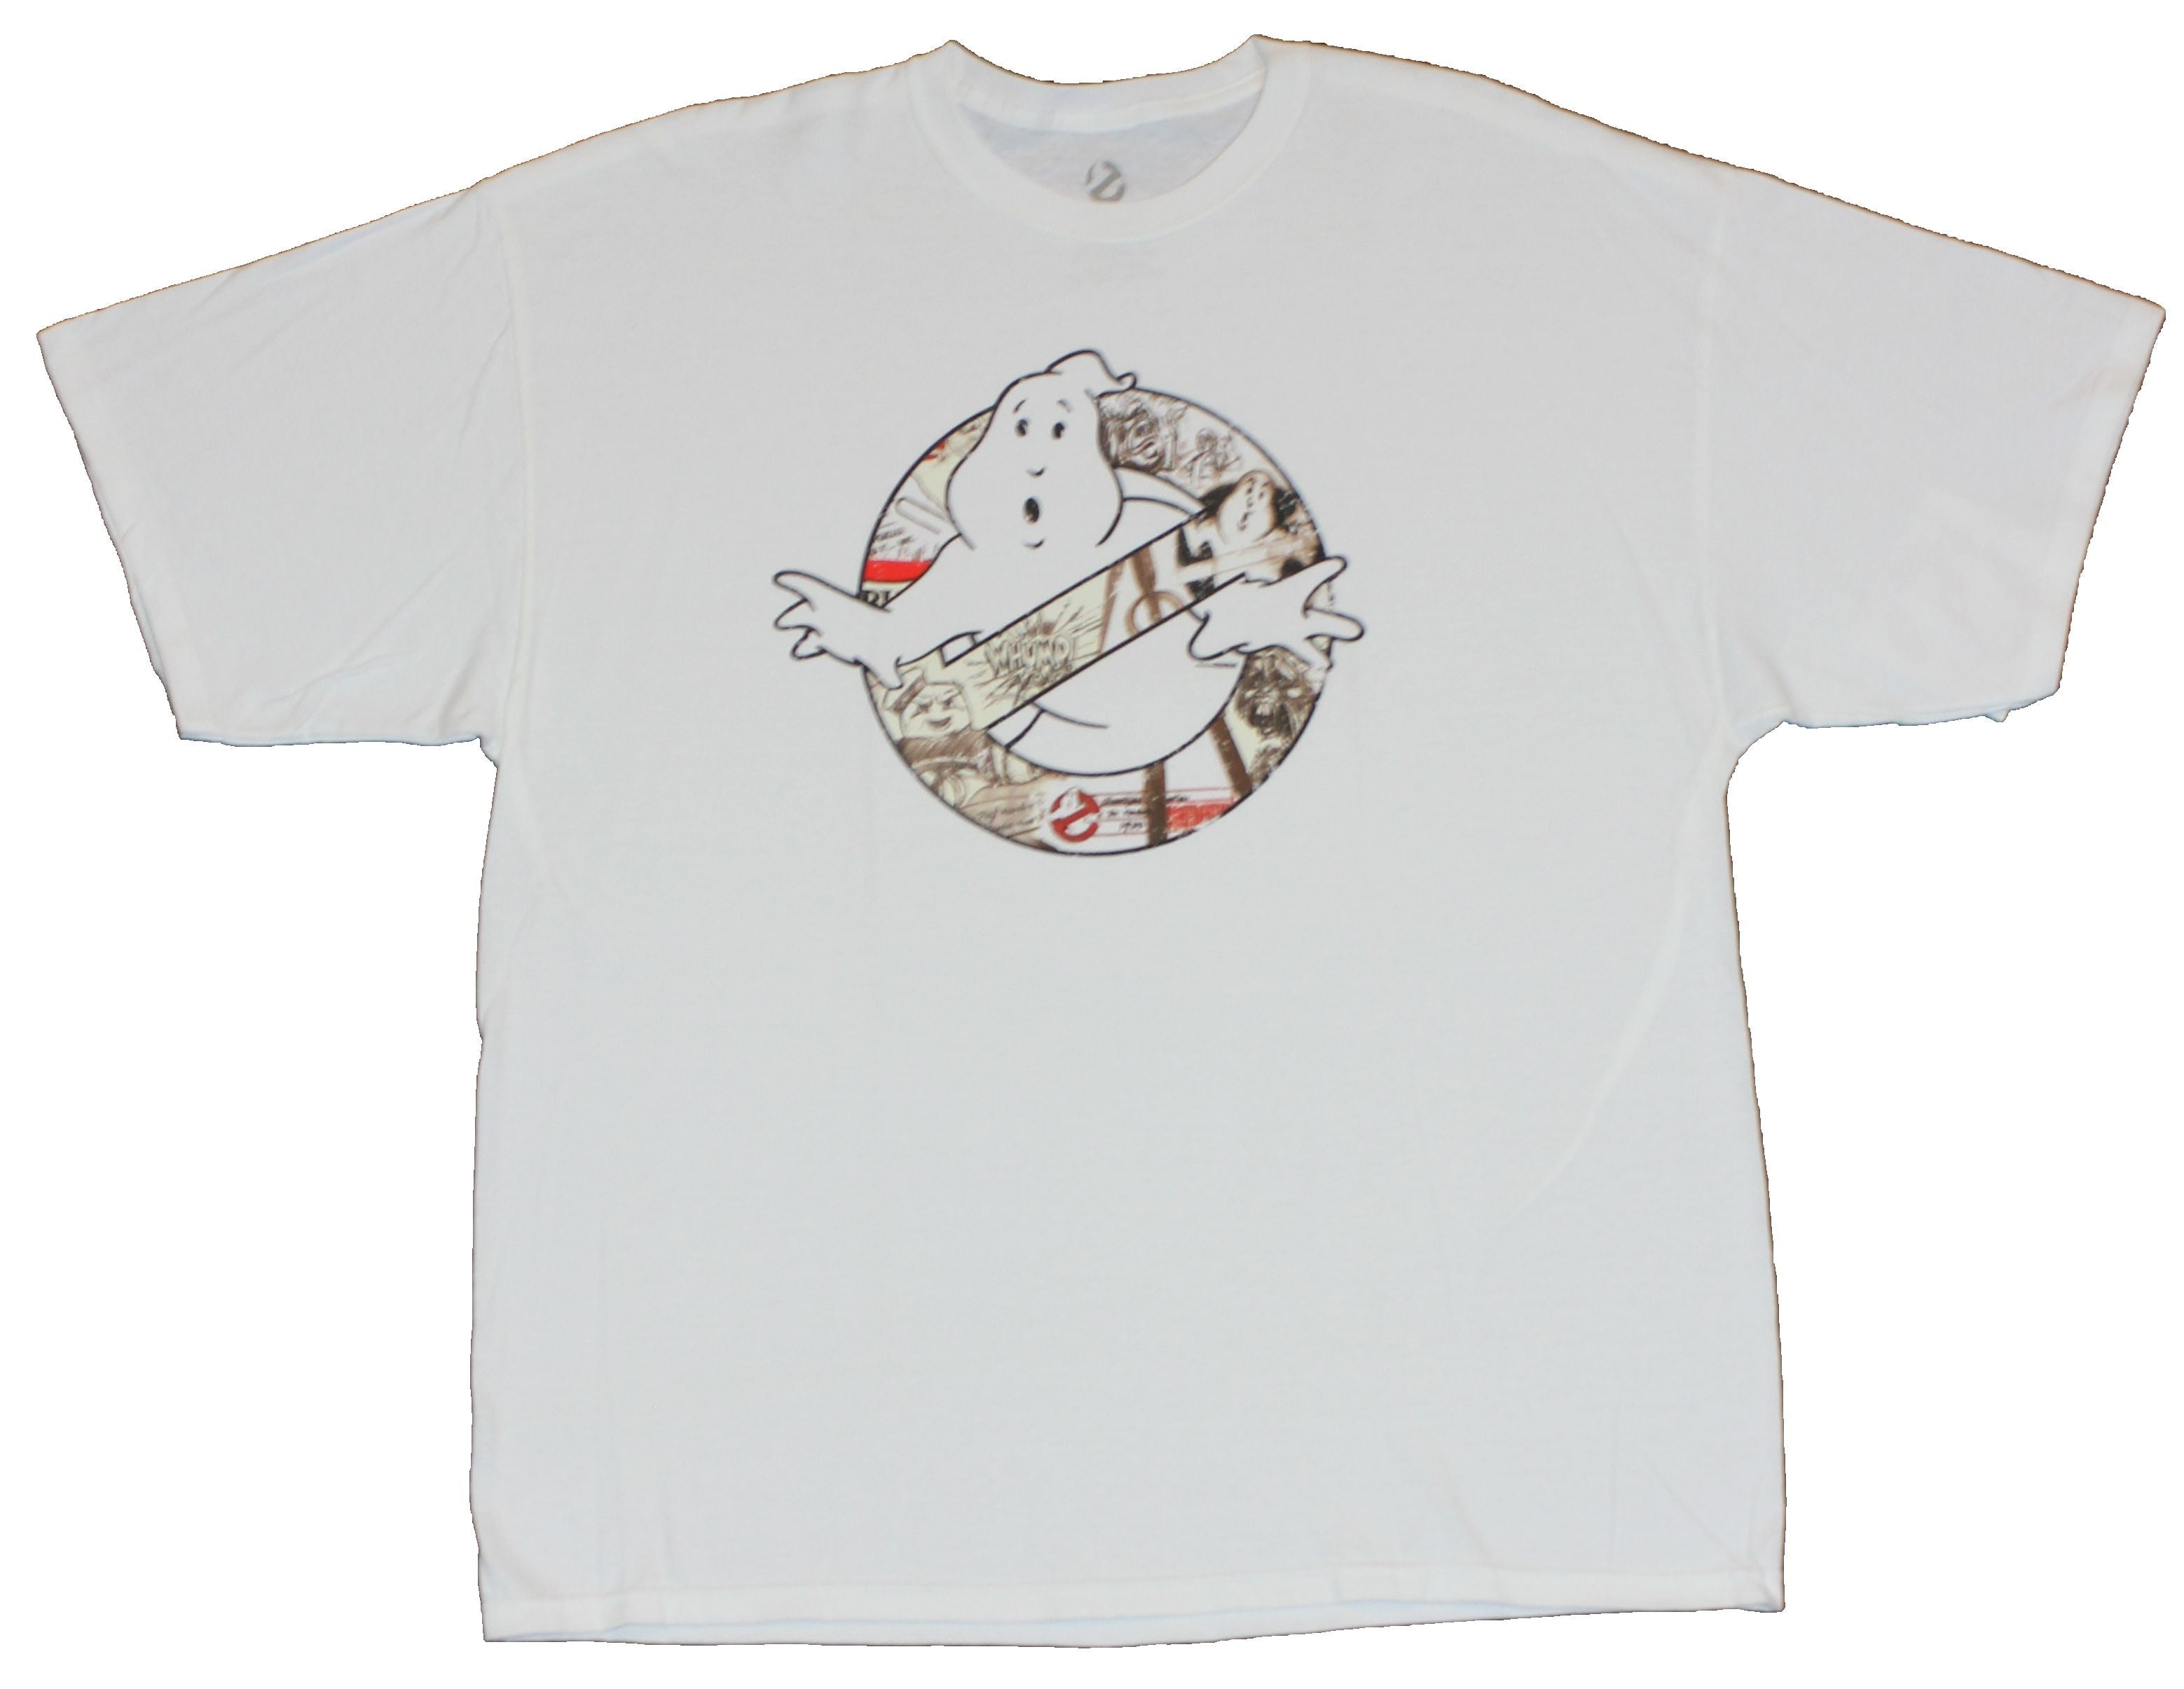 Ghostbusters Mens T-Shirt - Classic Logo Filled With Comic Collage